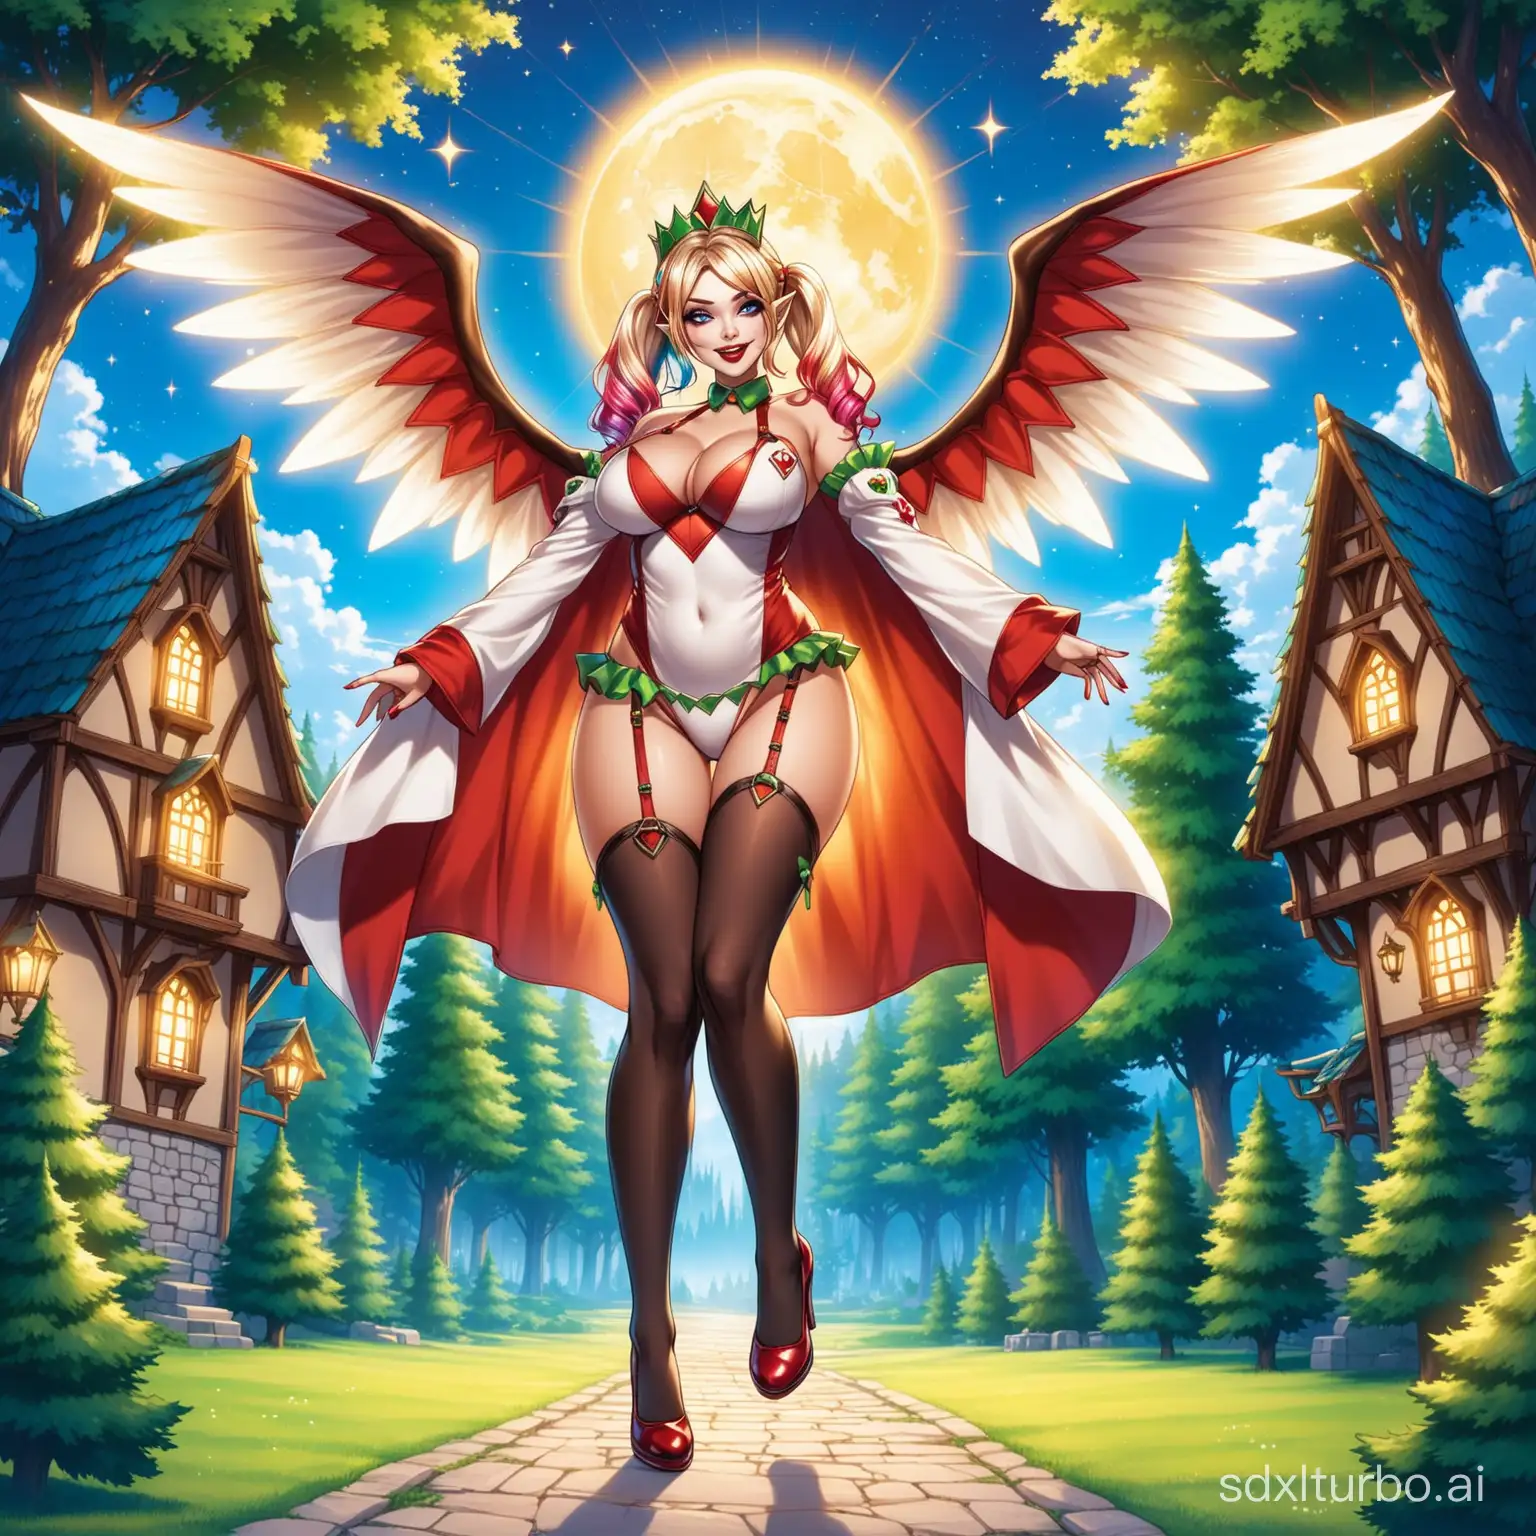 Busty gyaru elf Harley Quinn comes out of a portal to another world putting her right leg forward, white magic robe, deep neckline, underboob, stockings with garters, shoes with wings, a shining tiara, around the elven kingdom, behind are houses on tall trees, sunny sky, there are two suns and two moons in the sky, style raw, real photograph, perfect body, professional shot, different angle.